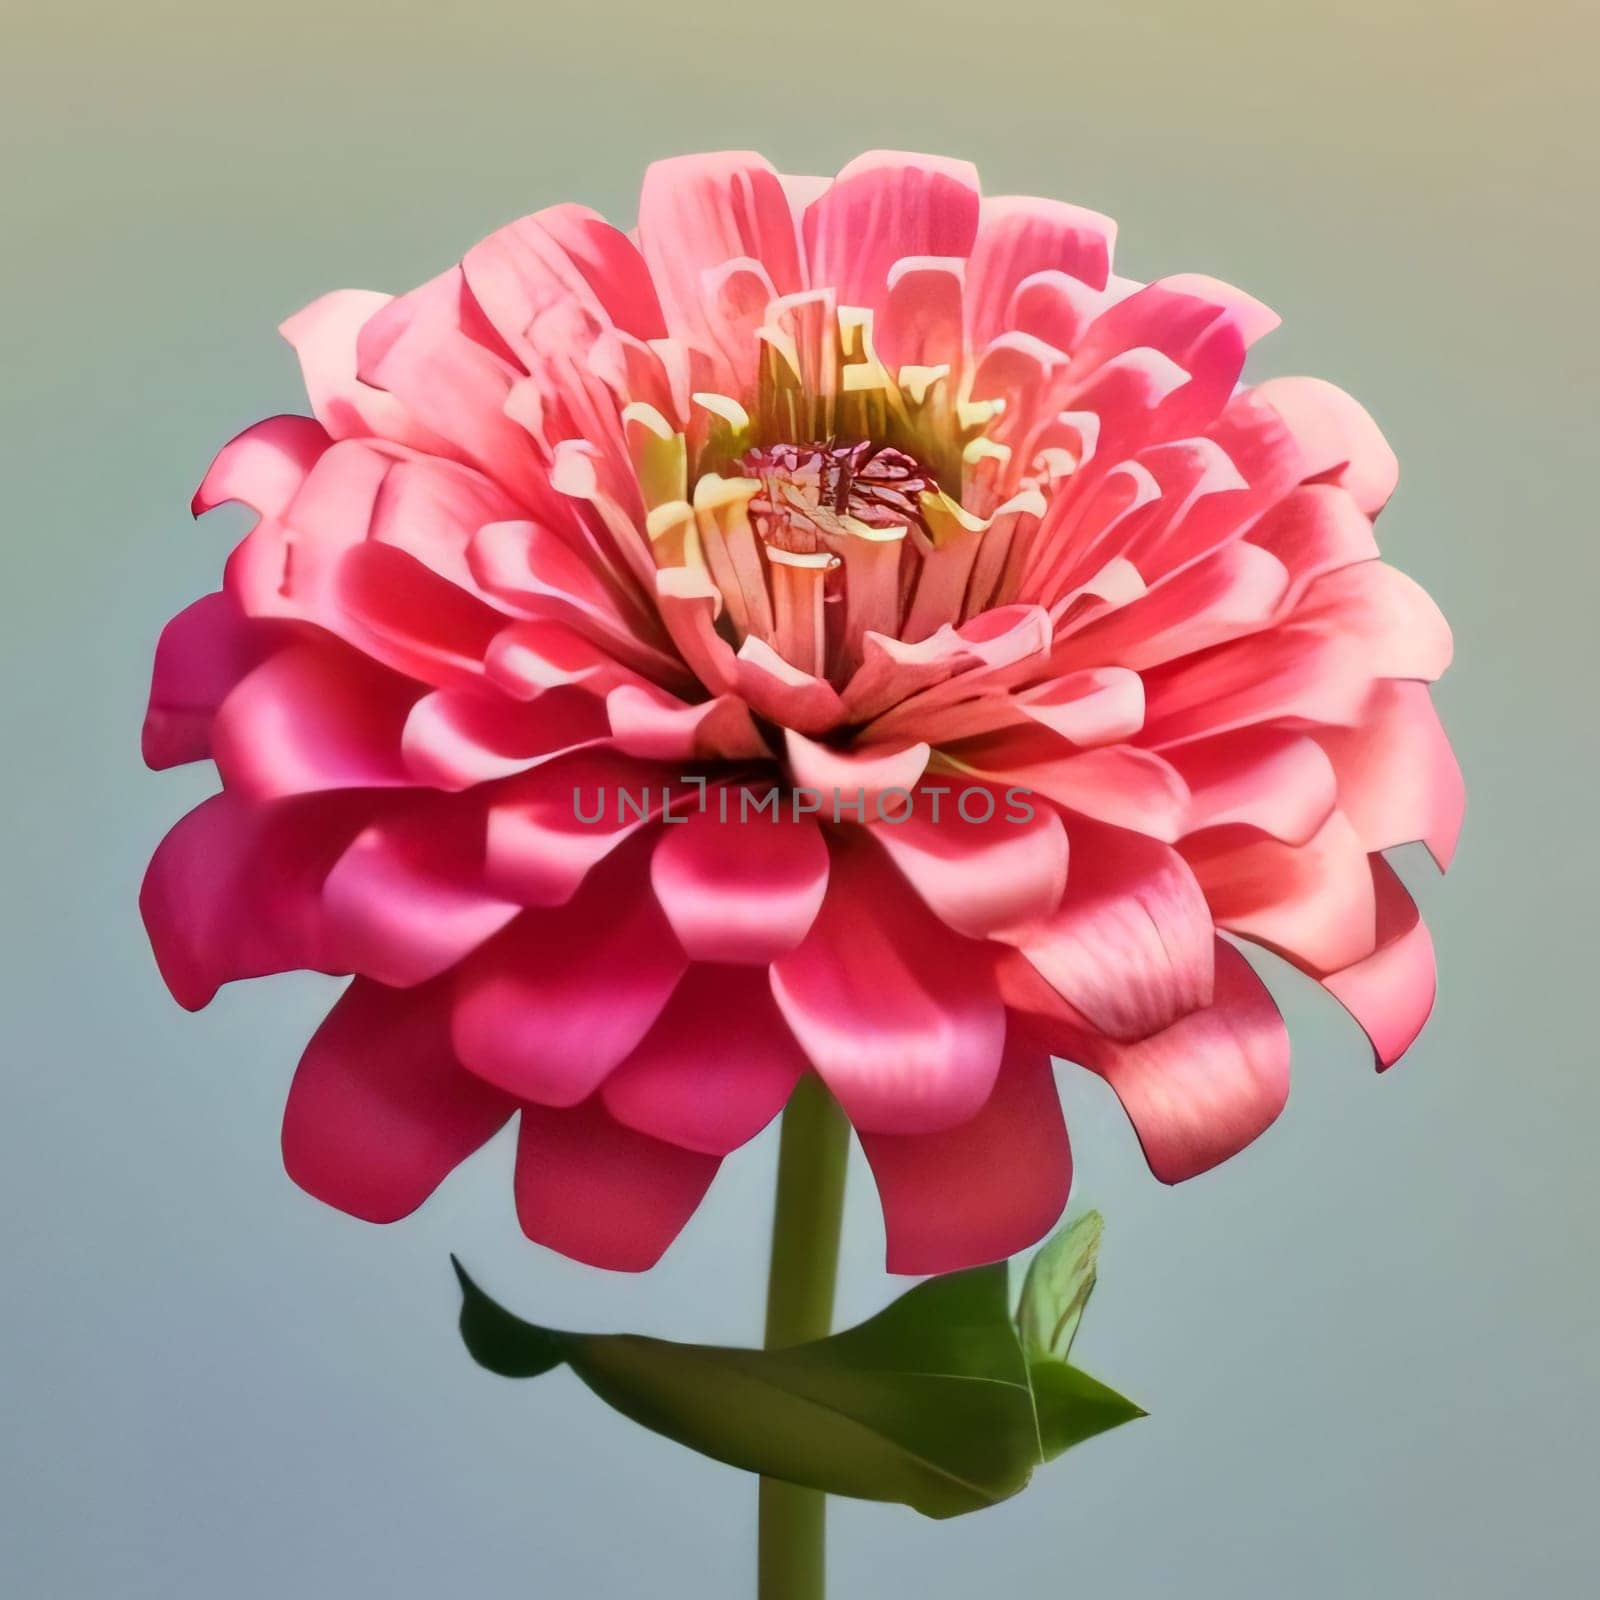 Pink and white dahlia isolated. Flowering flowers, a symbol of spring, new life. by ThemesS